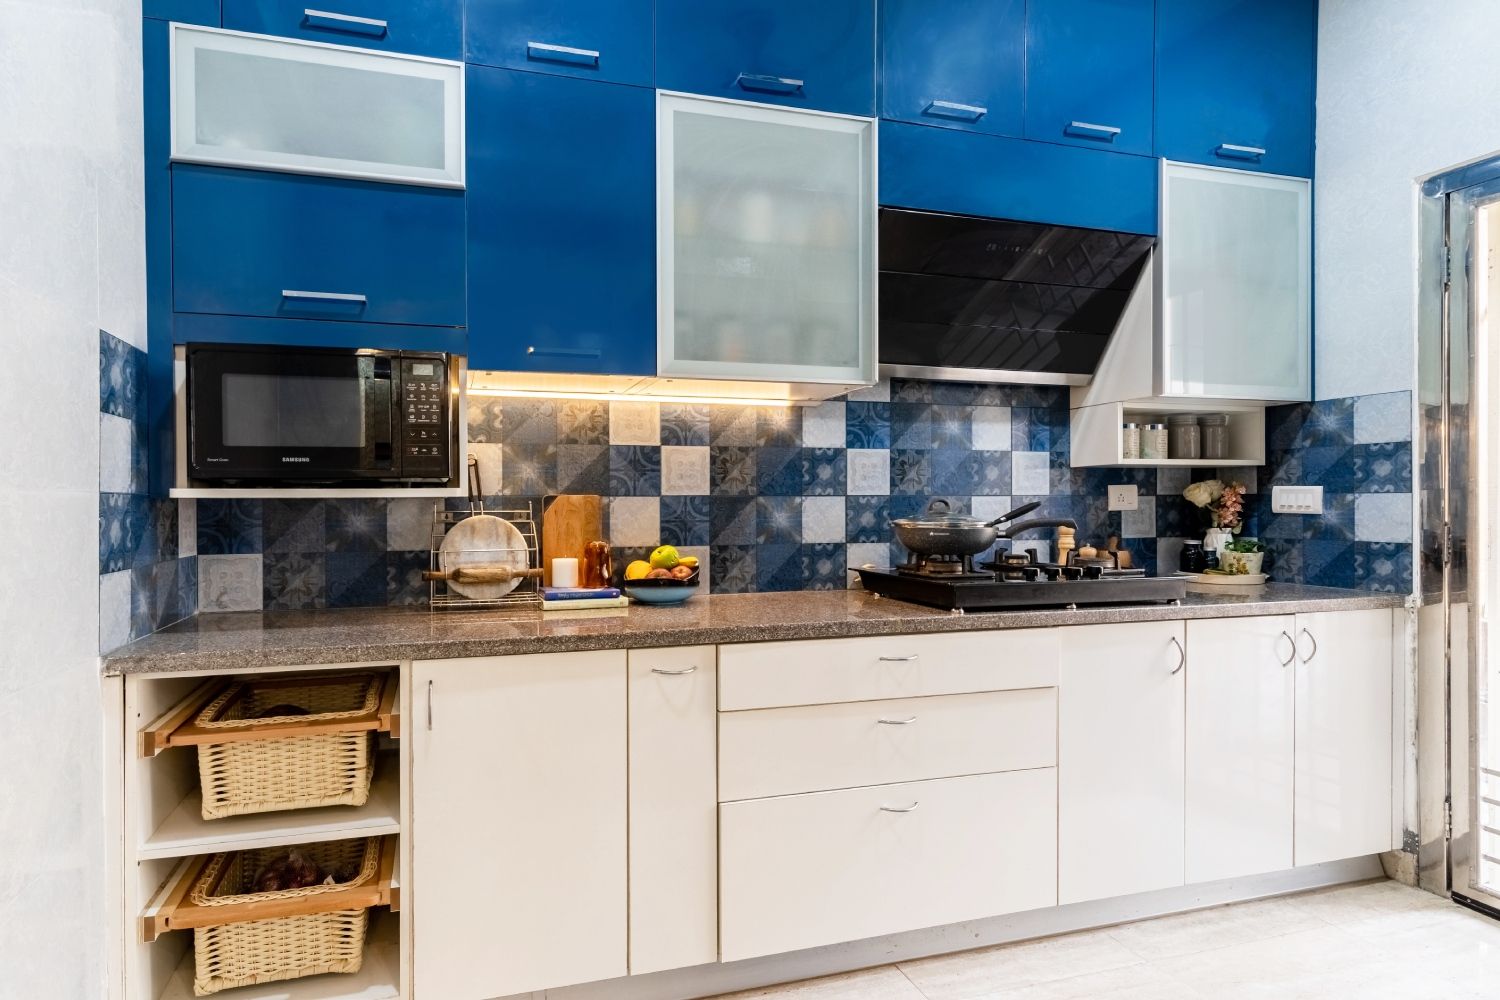 Modern Indian Kitchen Design With Spacious White And Blue Kitchen Cabinets